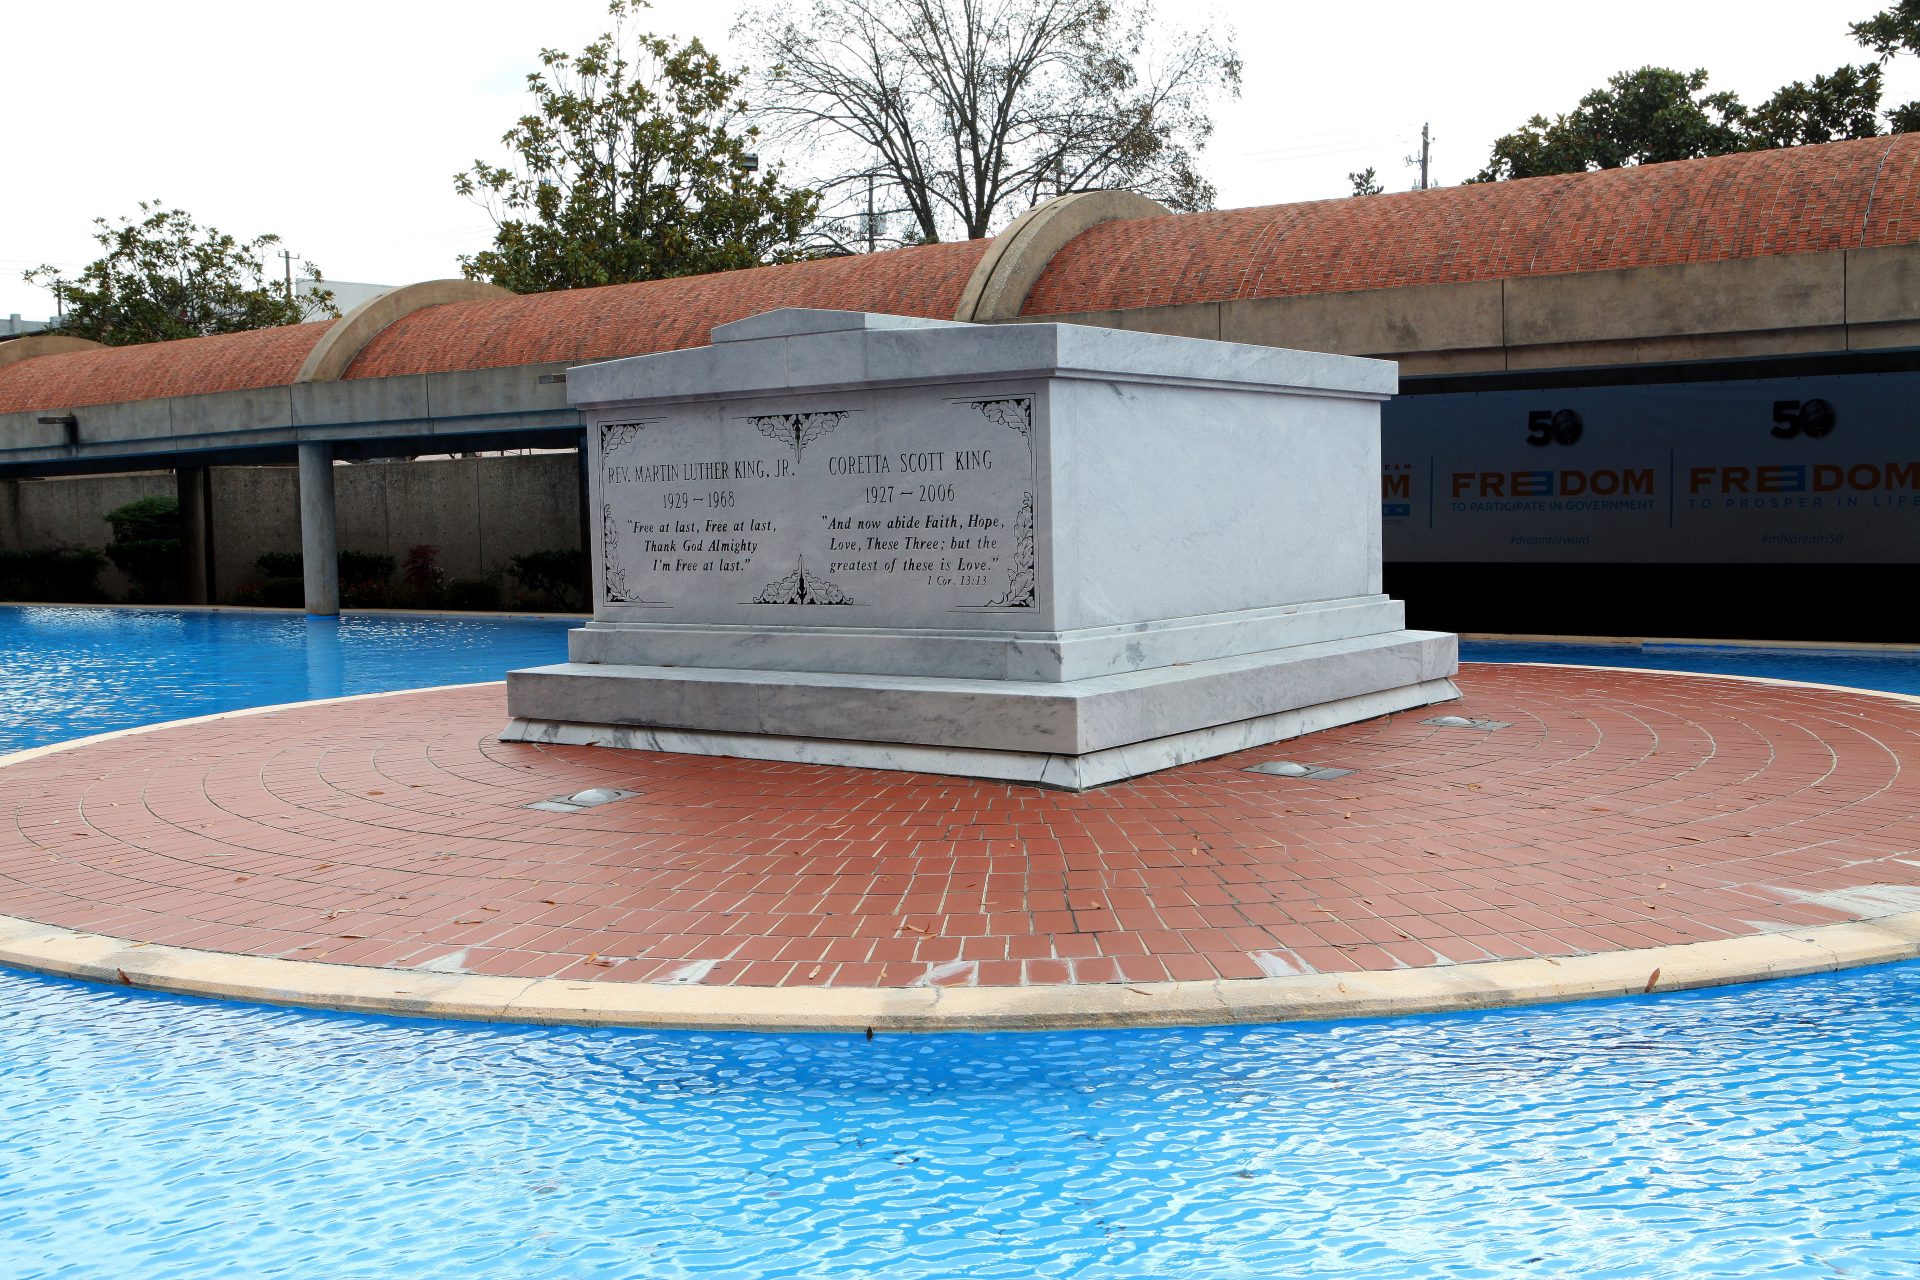 Tombs of Martin Luther King, Jr. and Coretta Scott King, at the Martin Luther King, Jr. Center for Nonviolent Social Change, in Atlanta, Georgia on NOVEMBER 23, 2013. (Photo By Raymond Boyd/Getty Images)